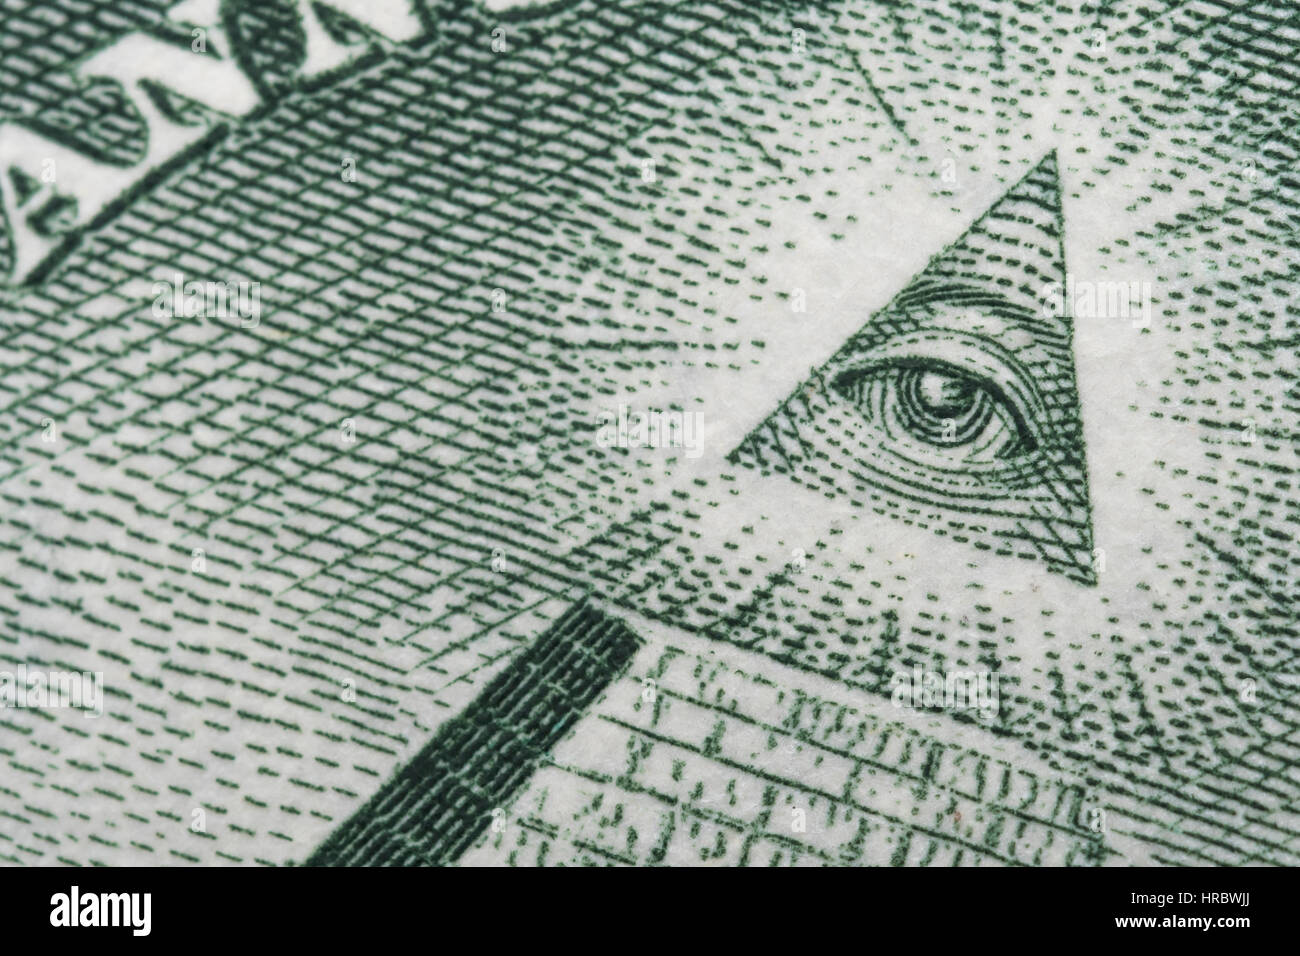 Ultra close up / macro photo of Eye details on a US $1 / One Dollar bill / banknote. Metaphor for US trade / currency / business, one dollar note USA. Stock Photo